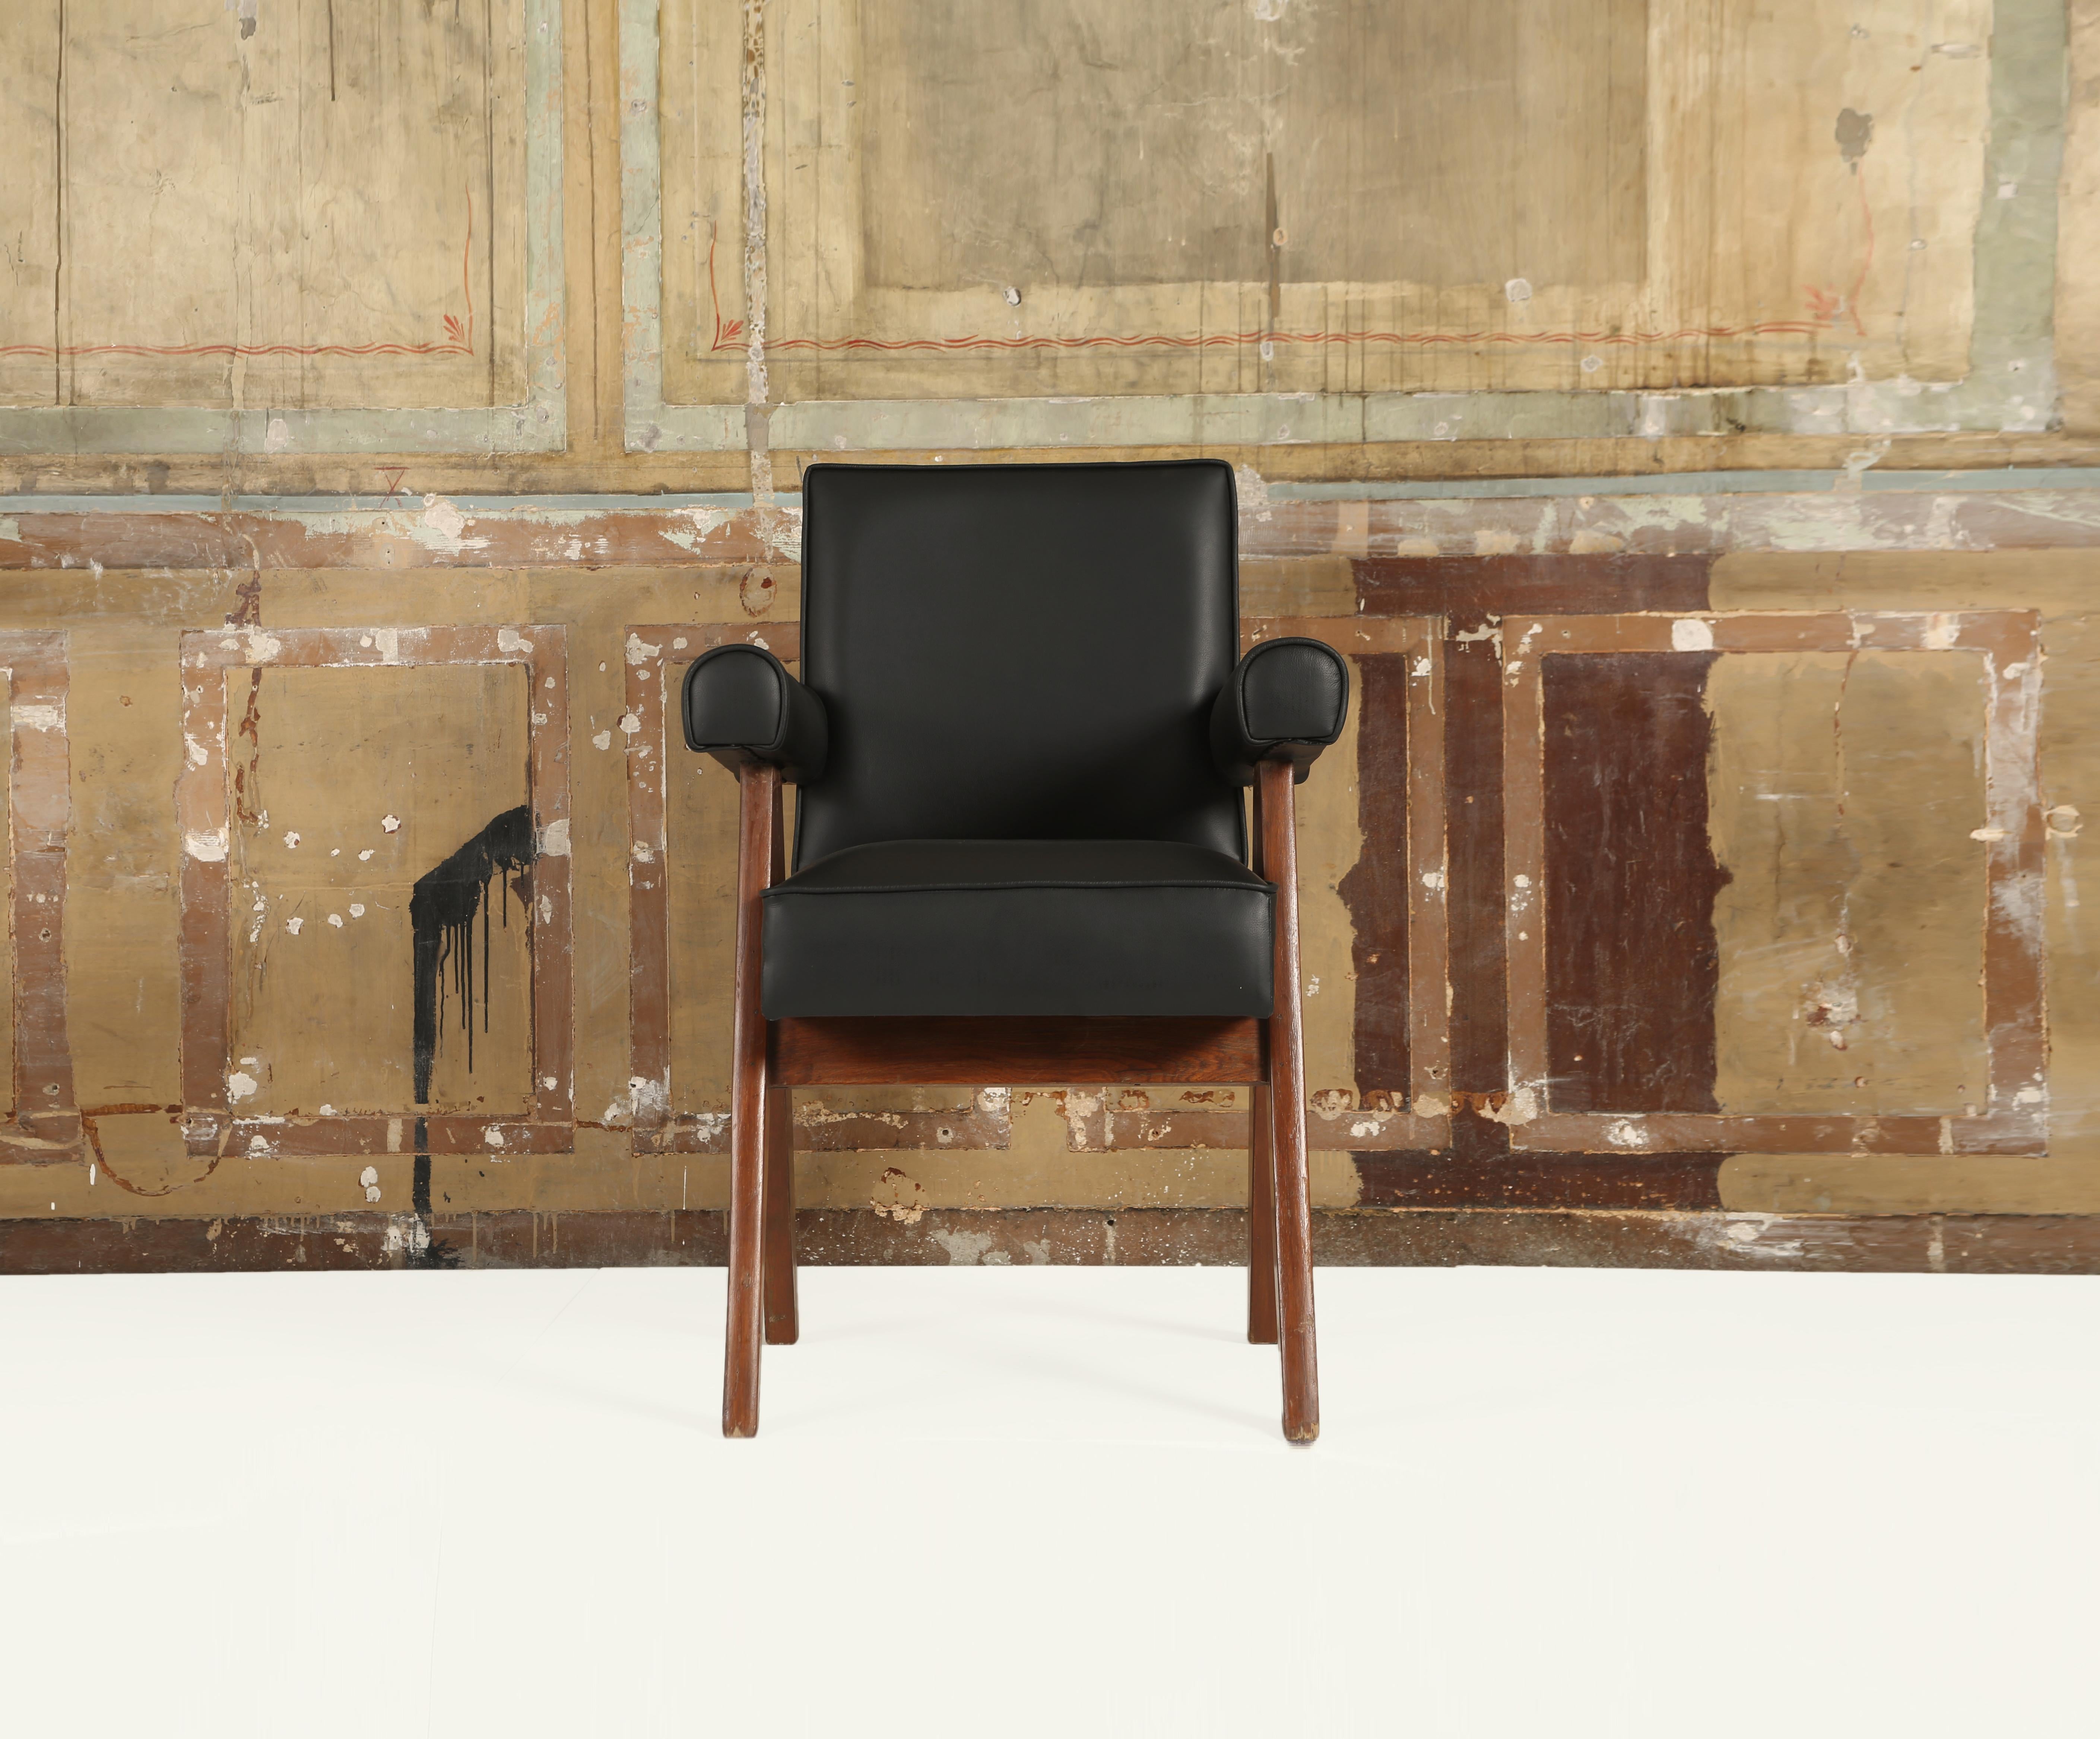 Pierre Jeanneret (1896–1967),

Pierre Jeanneret “Committee chair”, PJ-SI-30-C, circa 1953-1954

Chair structure with teak seat in leather.

Armchair “Committee chair” from High court, legislative assembly and various administrative buildings